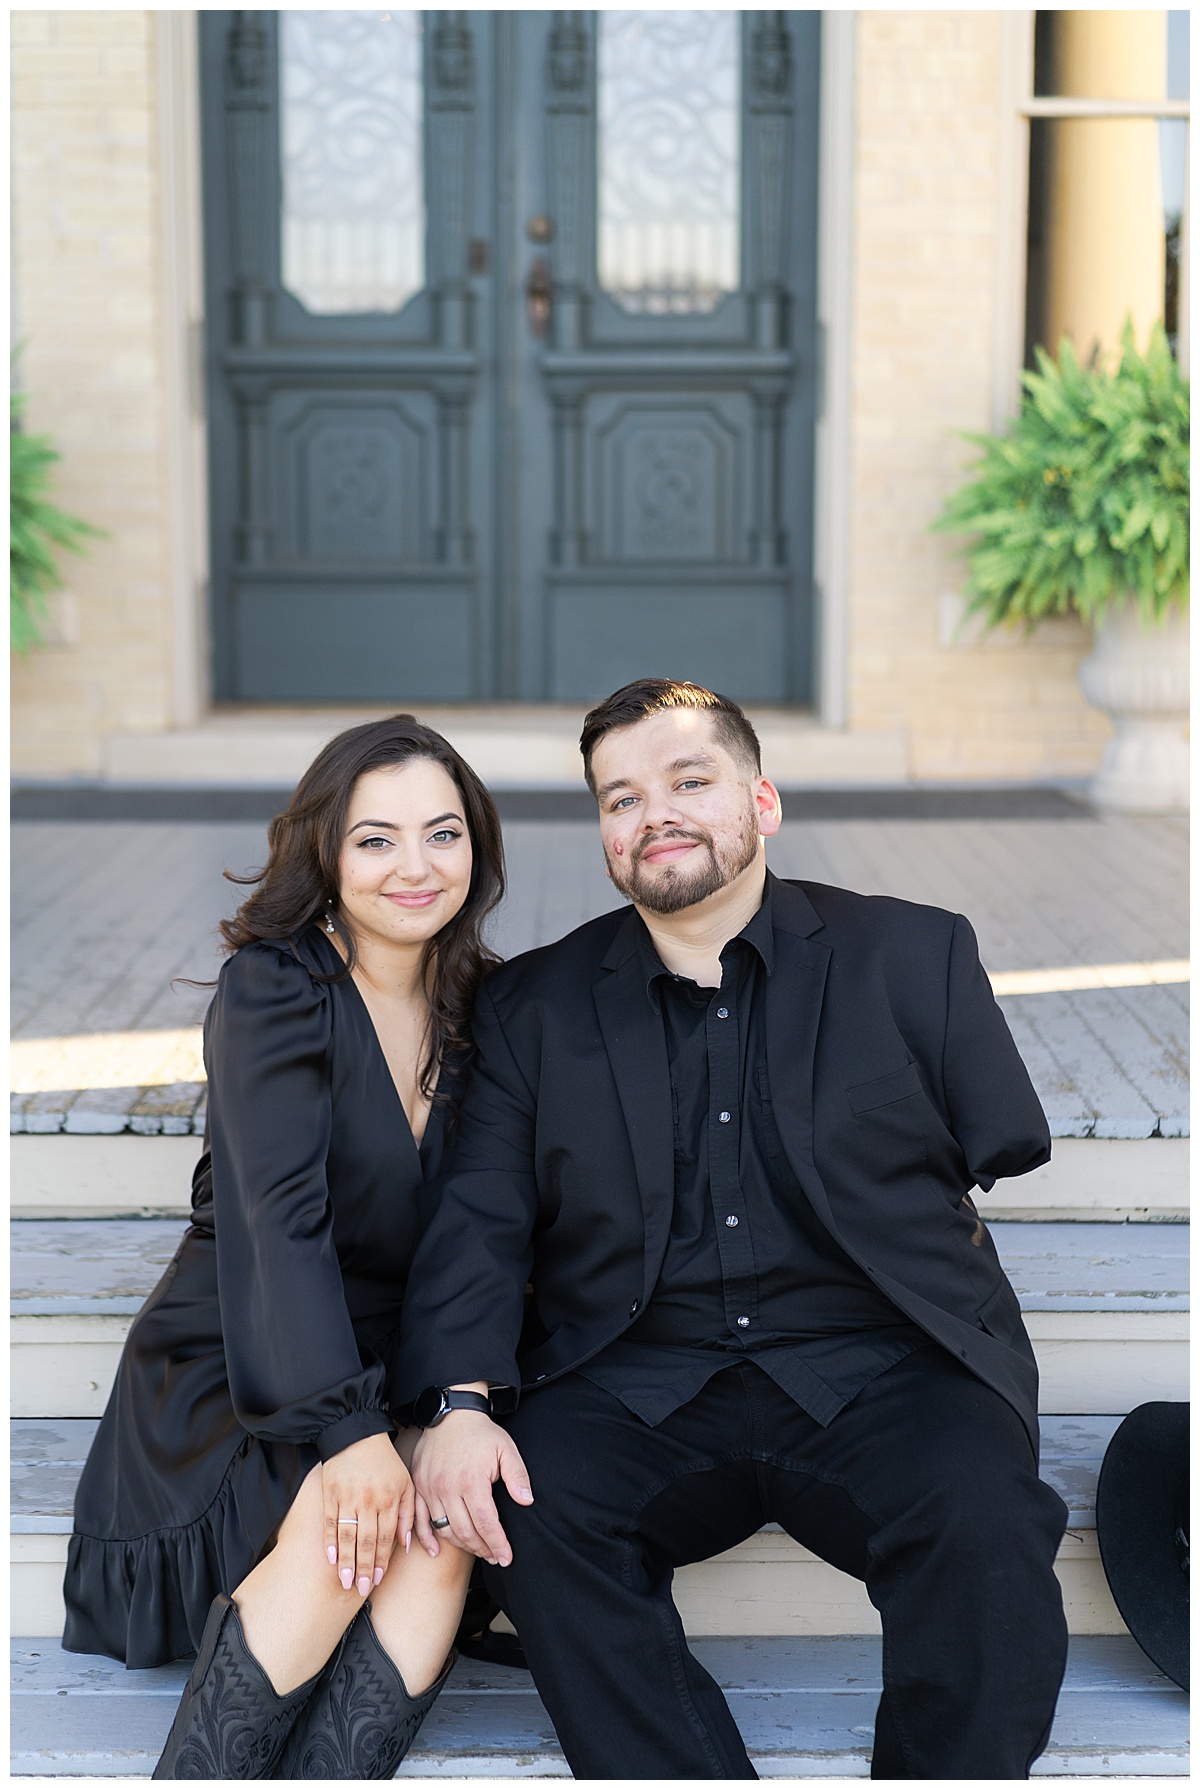 Man and woman sit together on steps for Houston’s Best Wedding Photographers